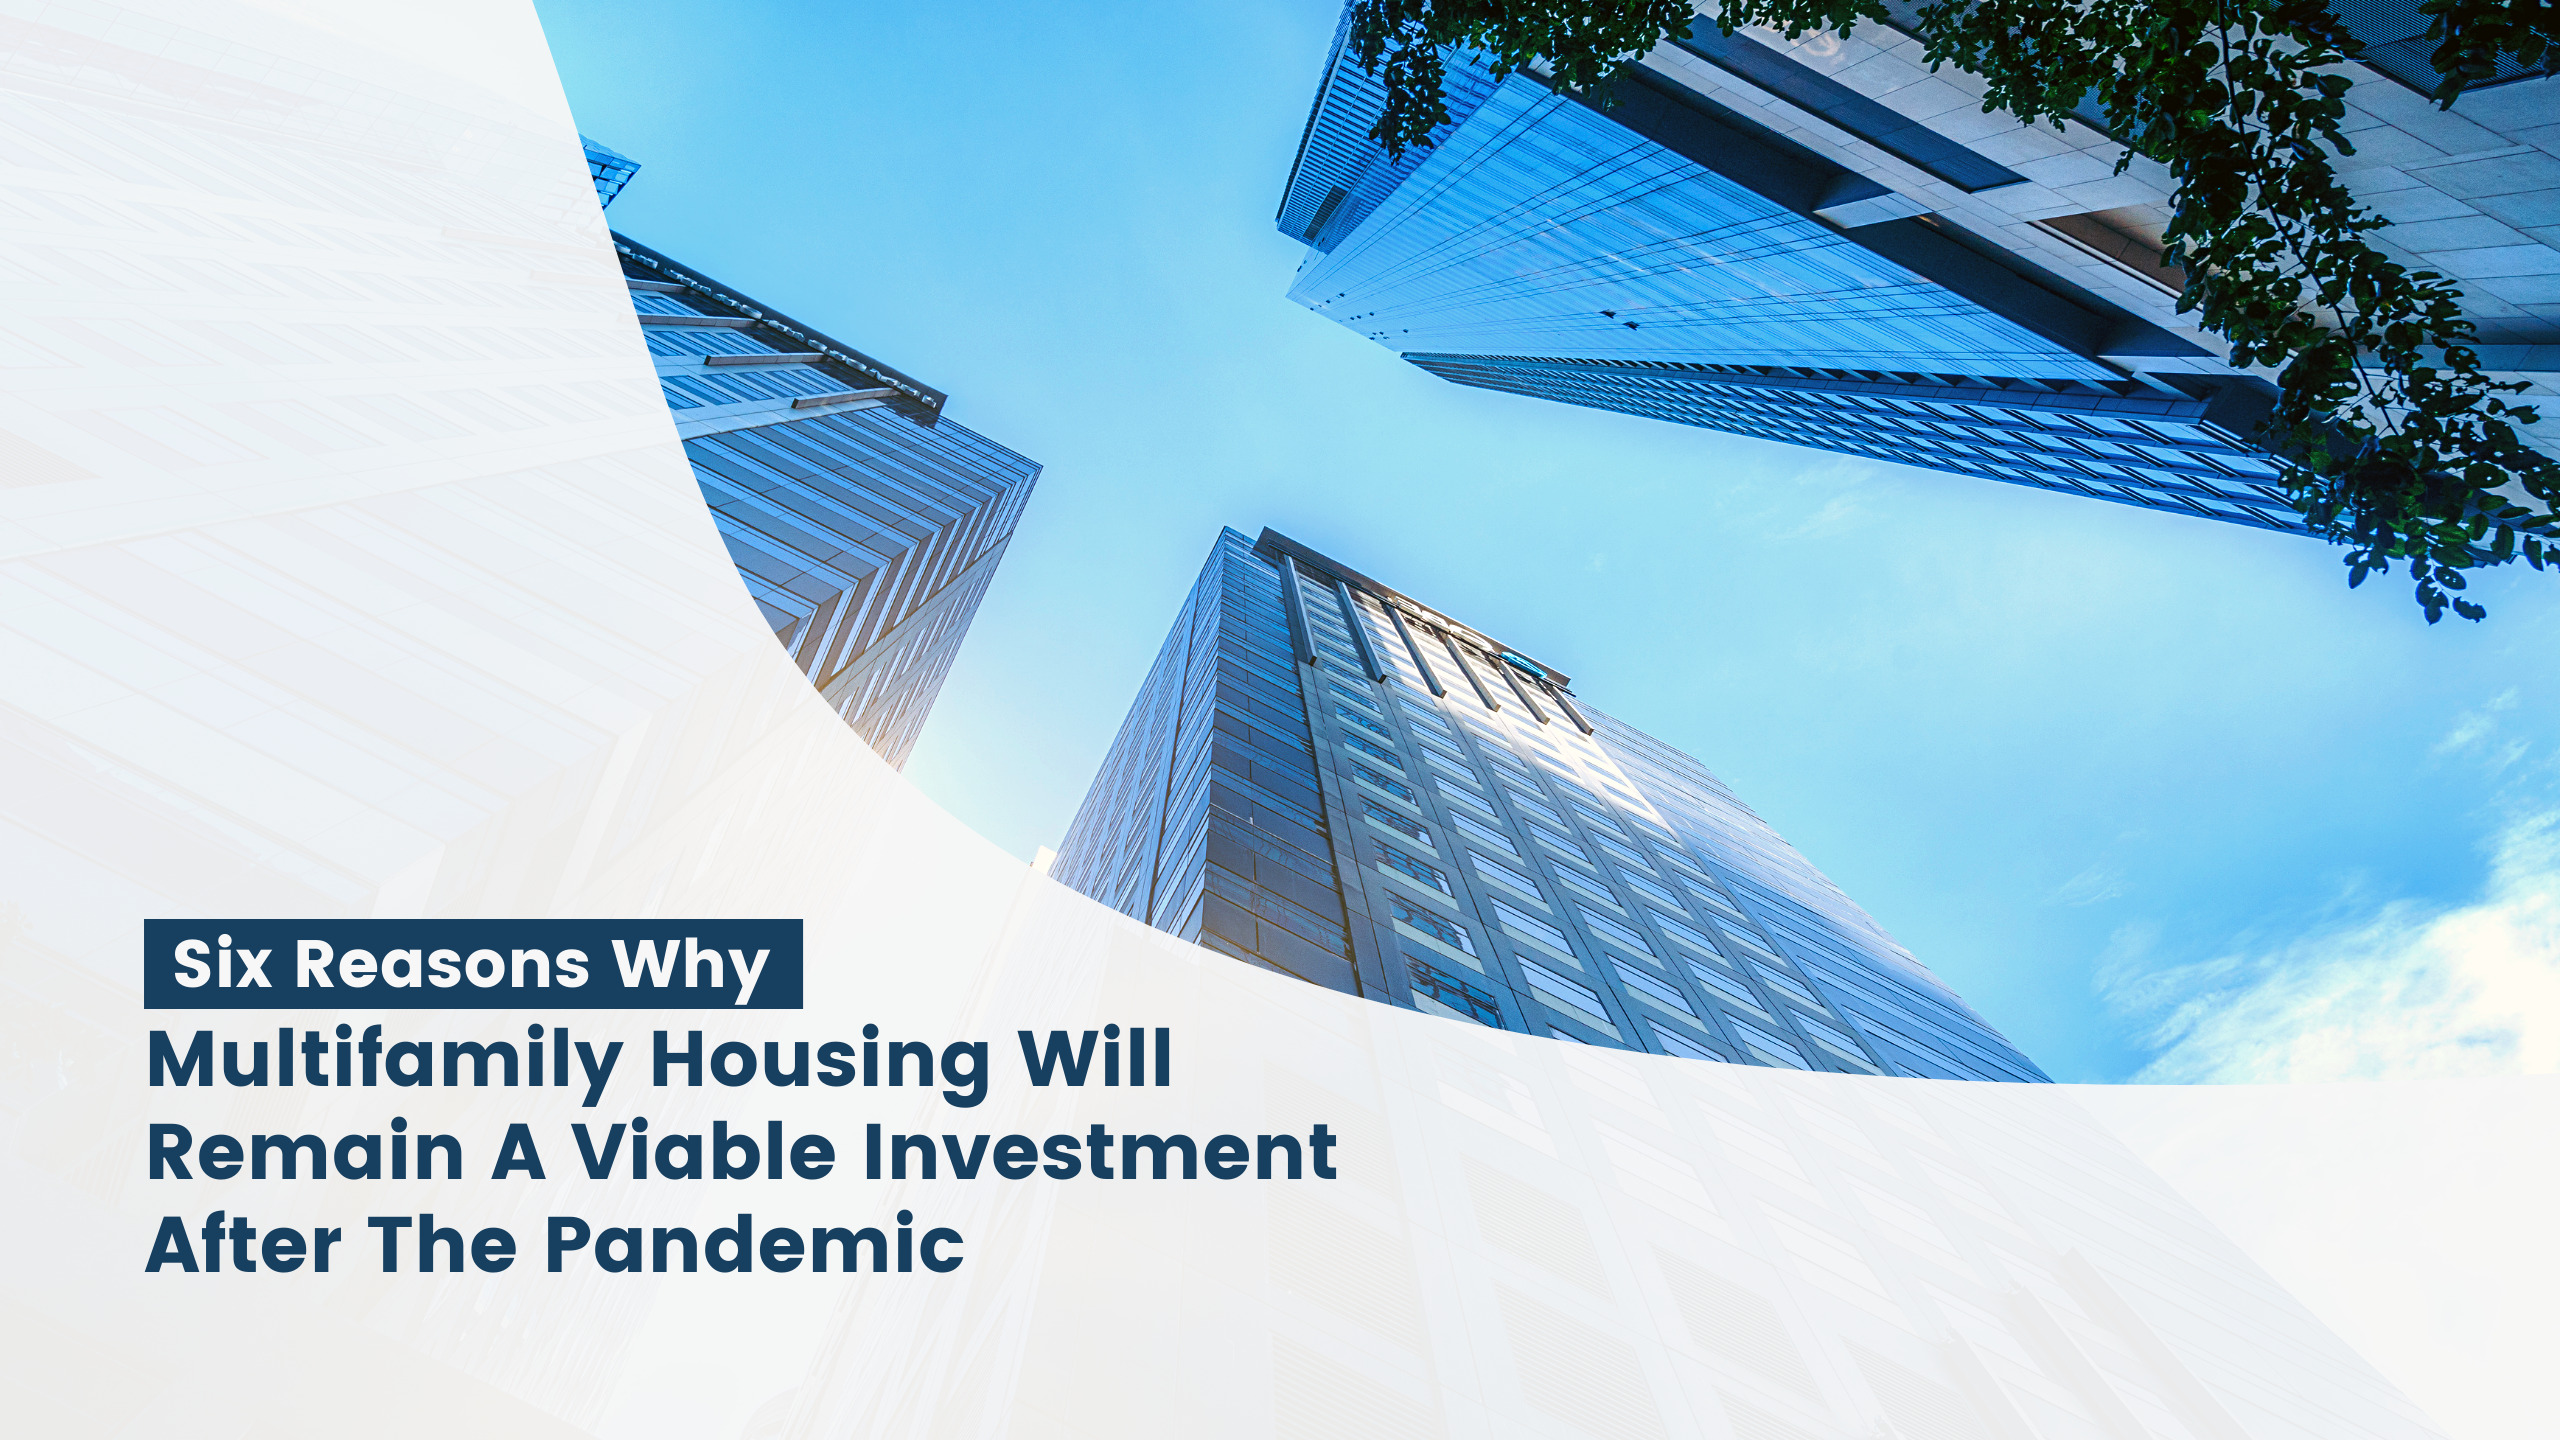 six-reasons-why-multifamily-housing-will-remain-a-viable-investment-after-the-pandemic.jpg